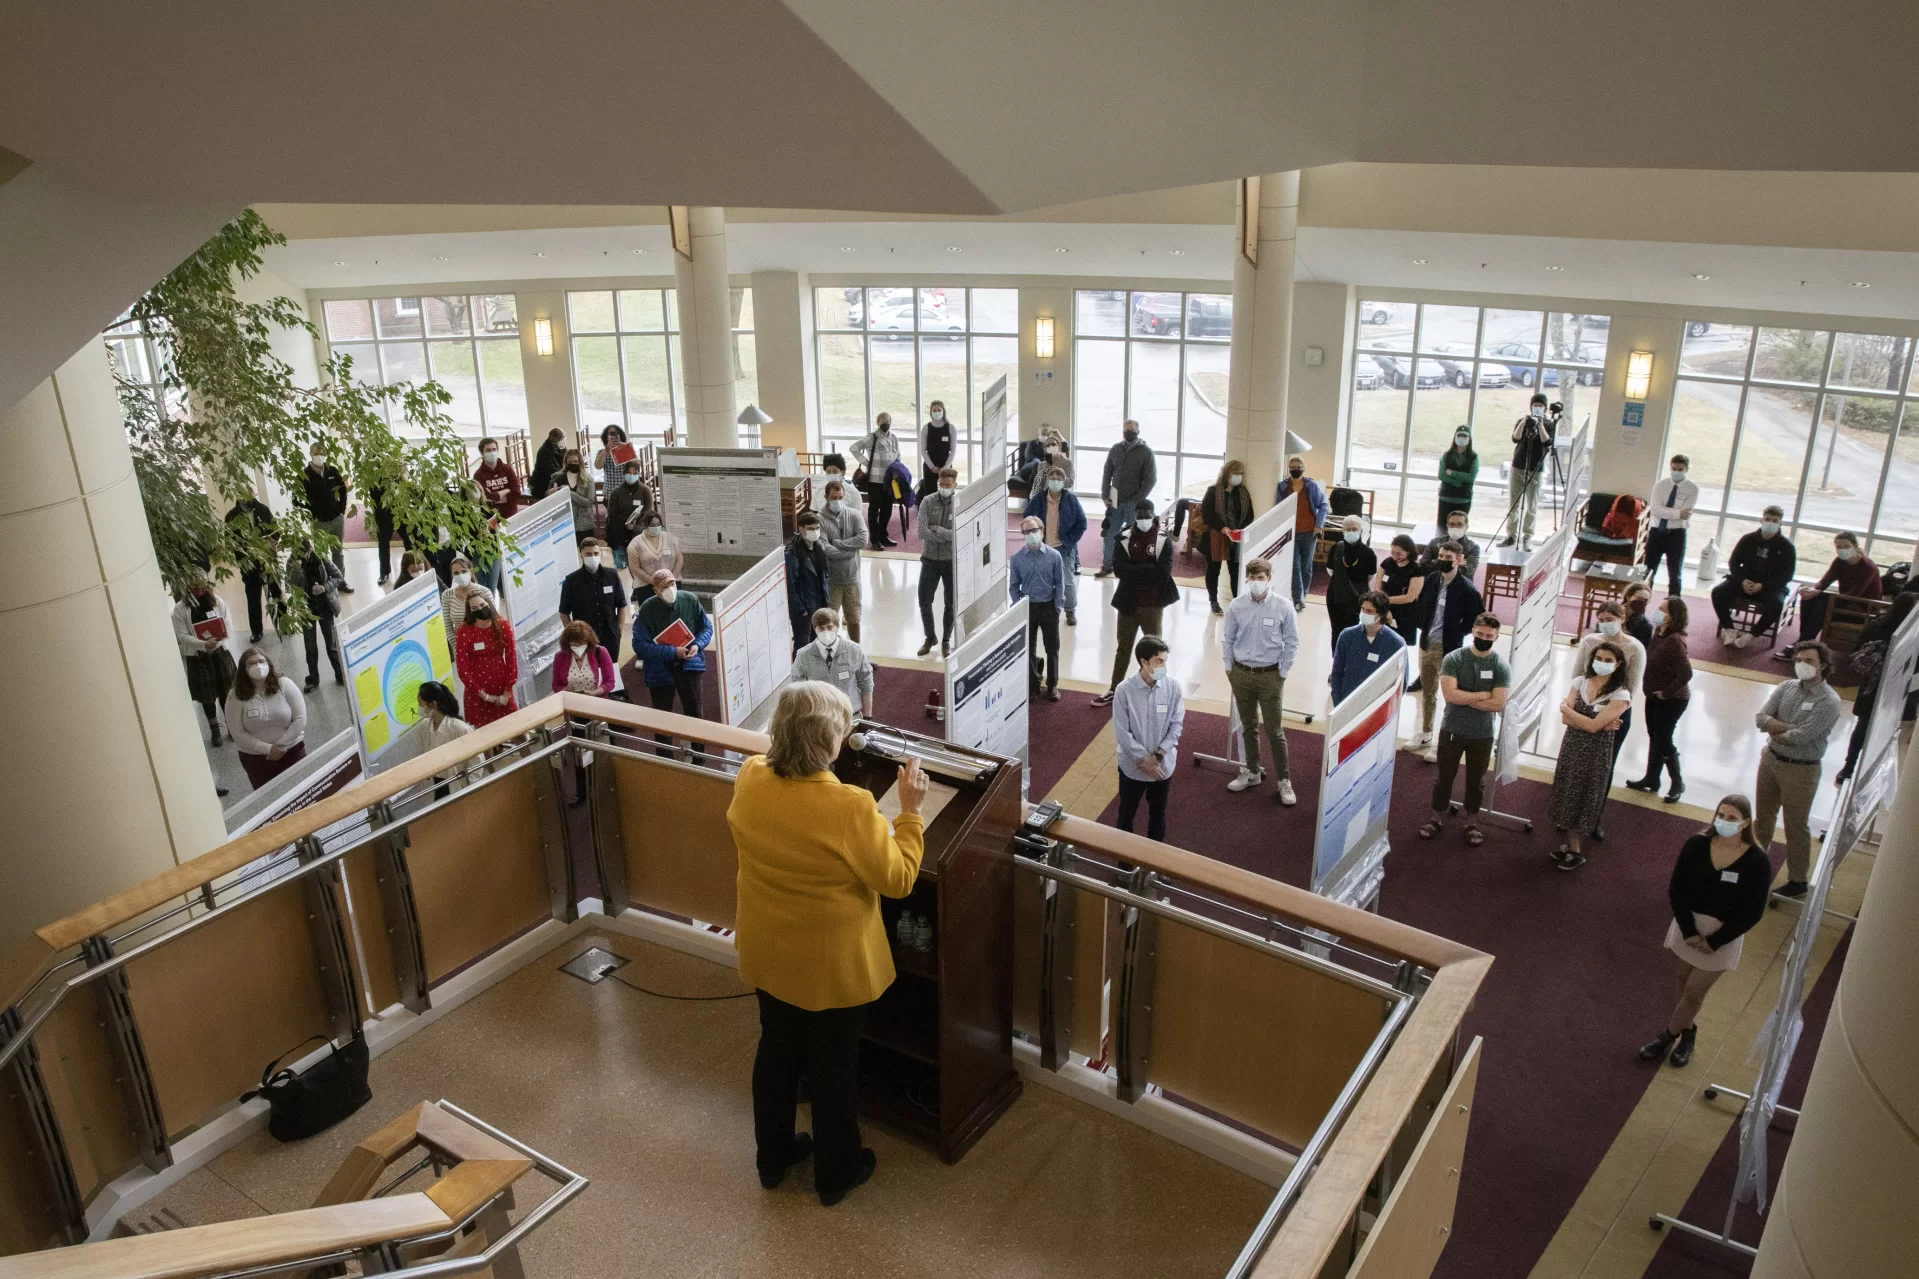 The Mount David Summit, a the annual celebration of student academic achievement and community at Bates College, took place on April 8, 2022, in Pettengill Hall.